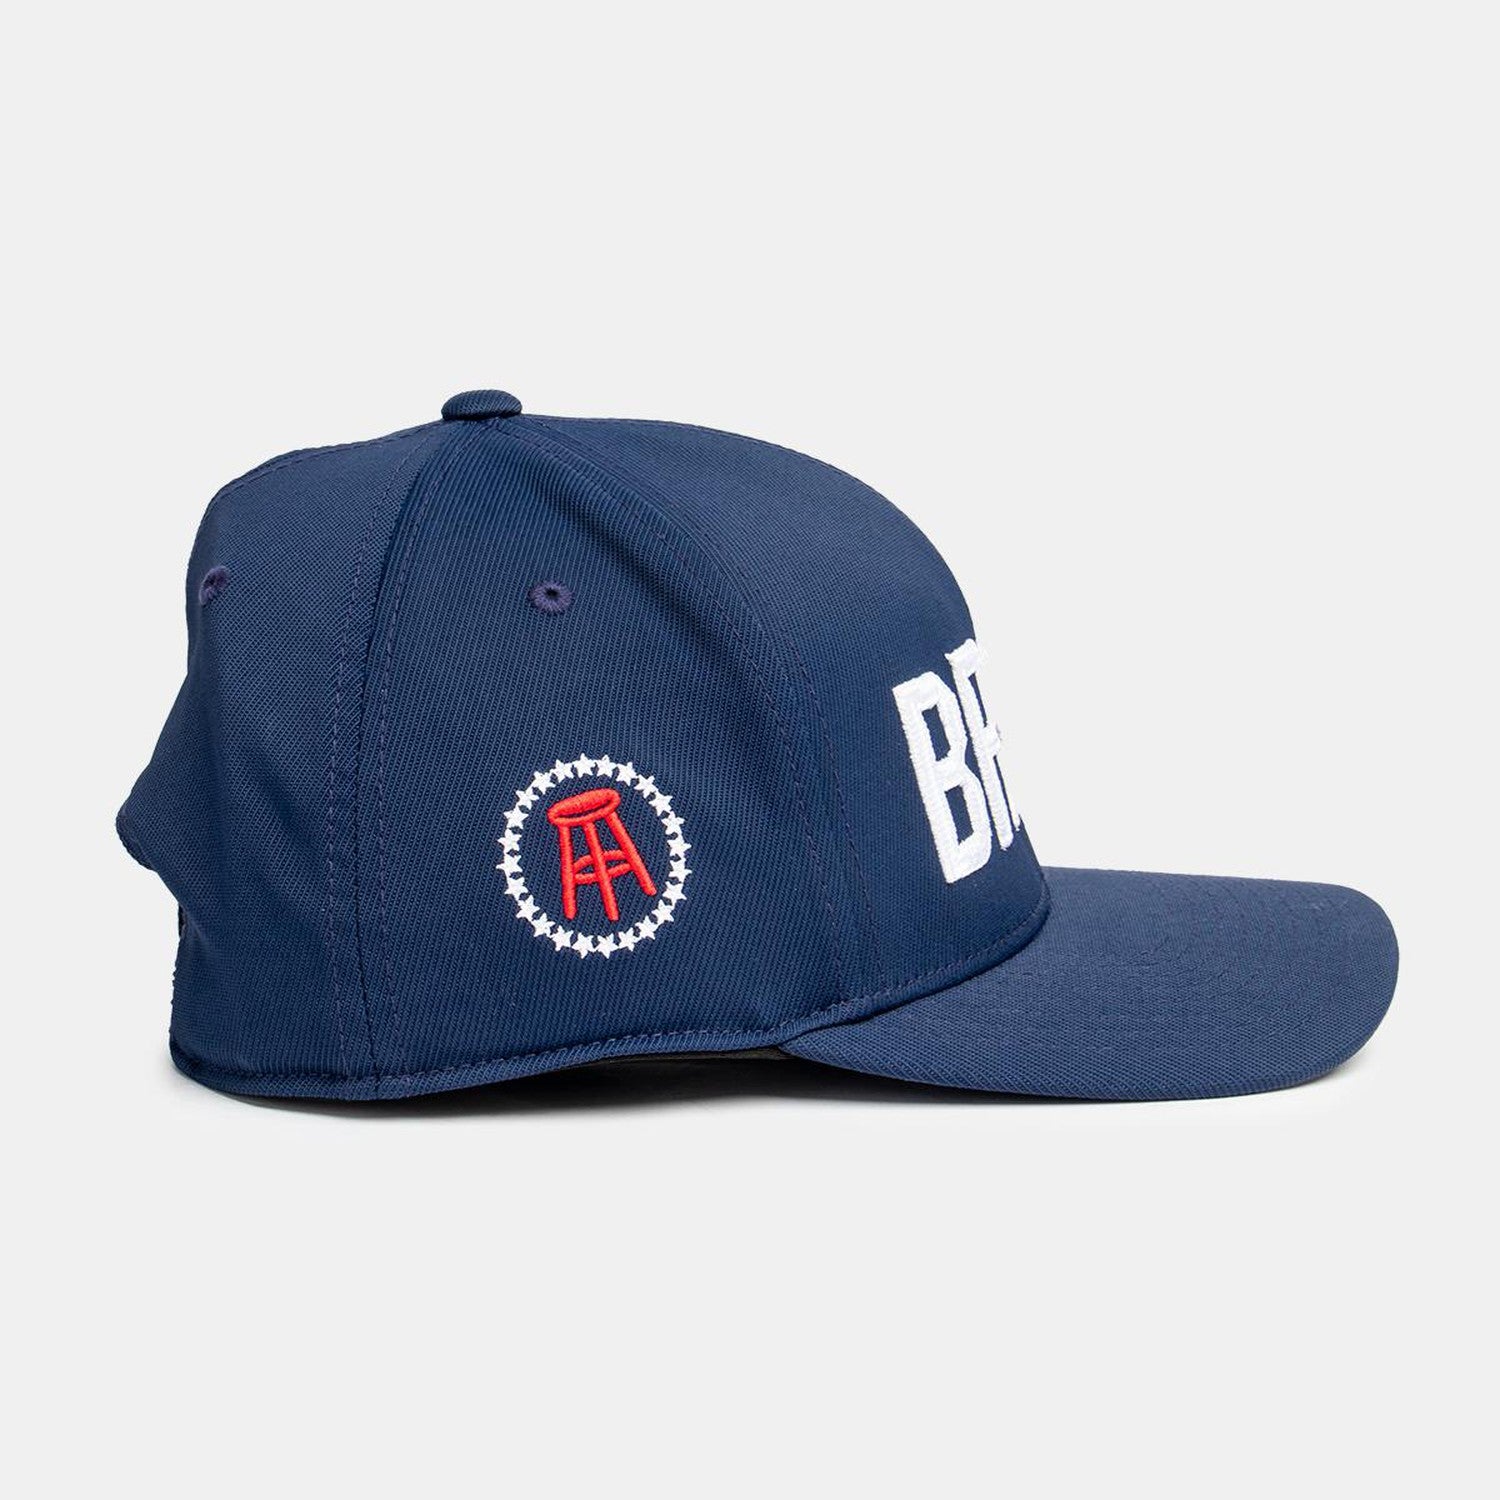 G/Fore x Barstool Golf Snapback Hat - Fore Play Hats, Clothing & Merch ...